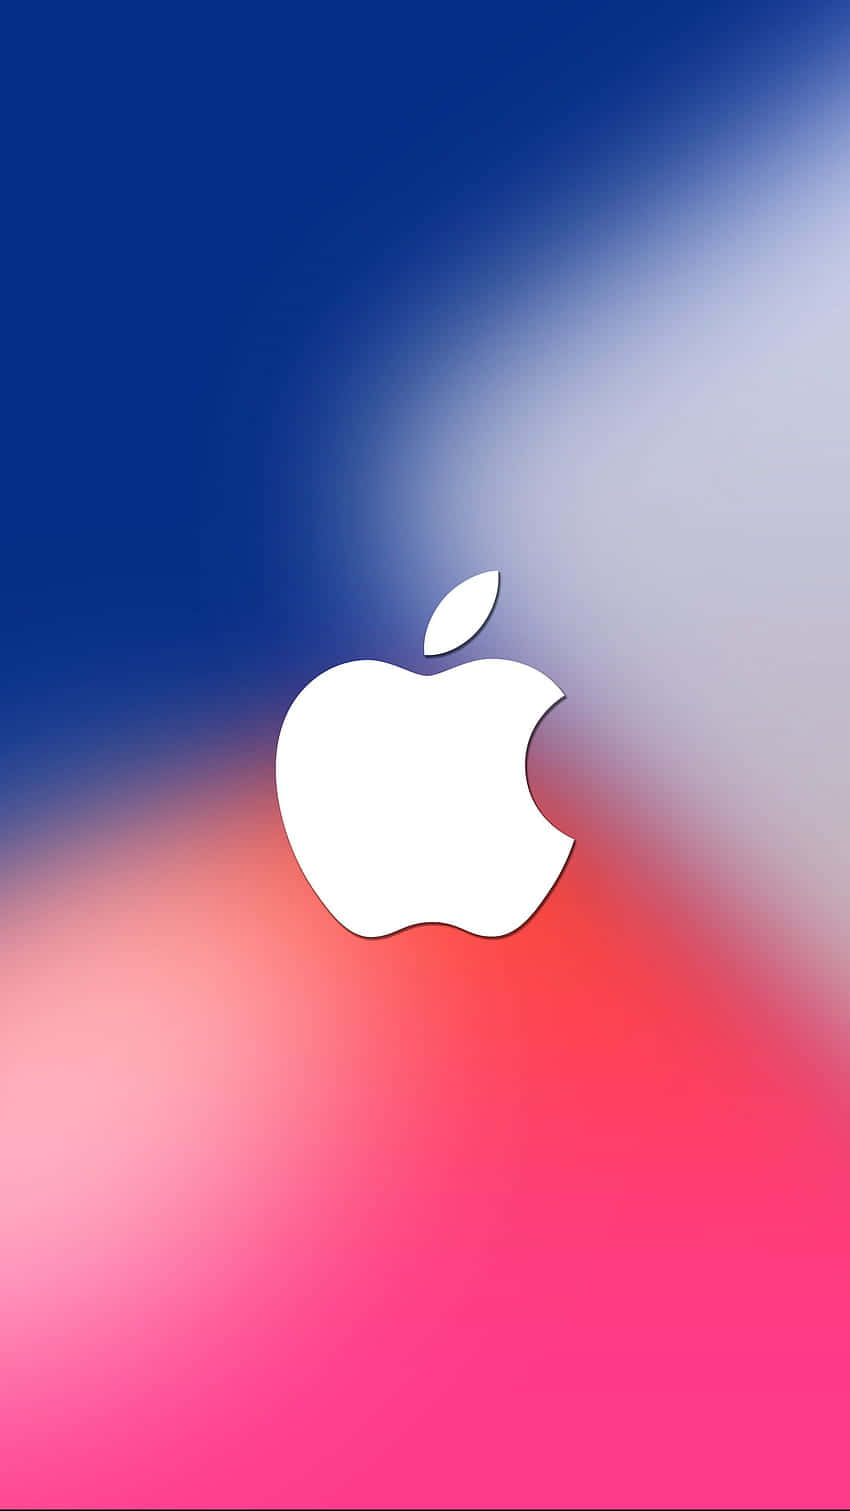 Apple Logo Iphone X Colorful Background Wallpaper